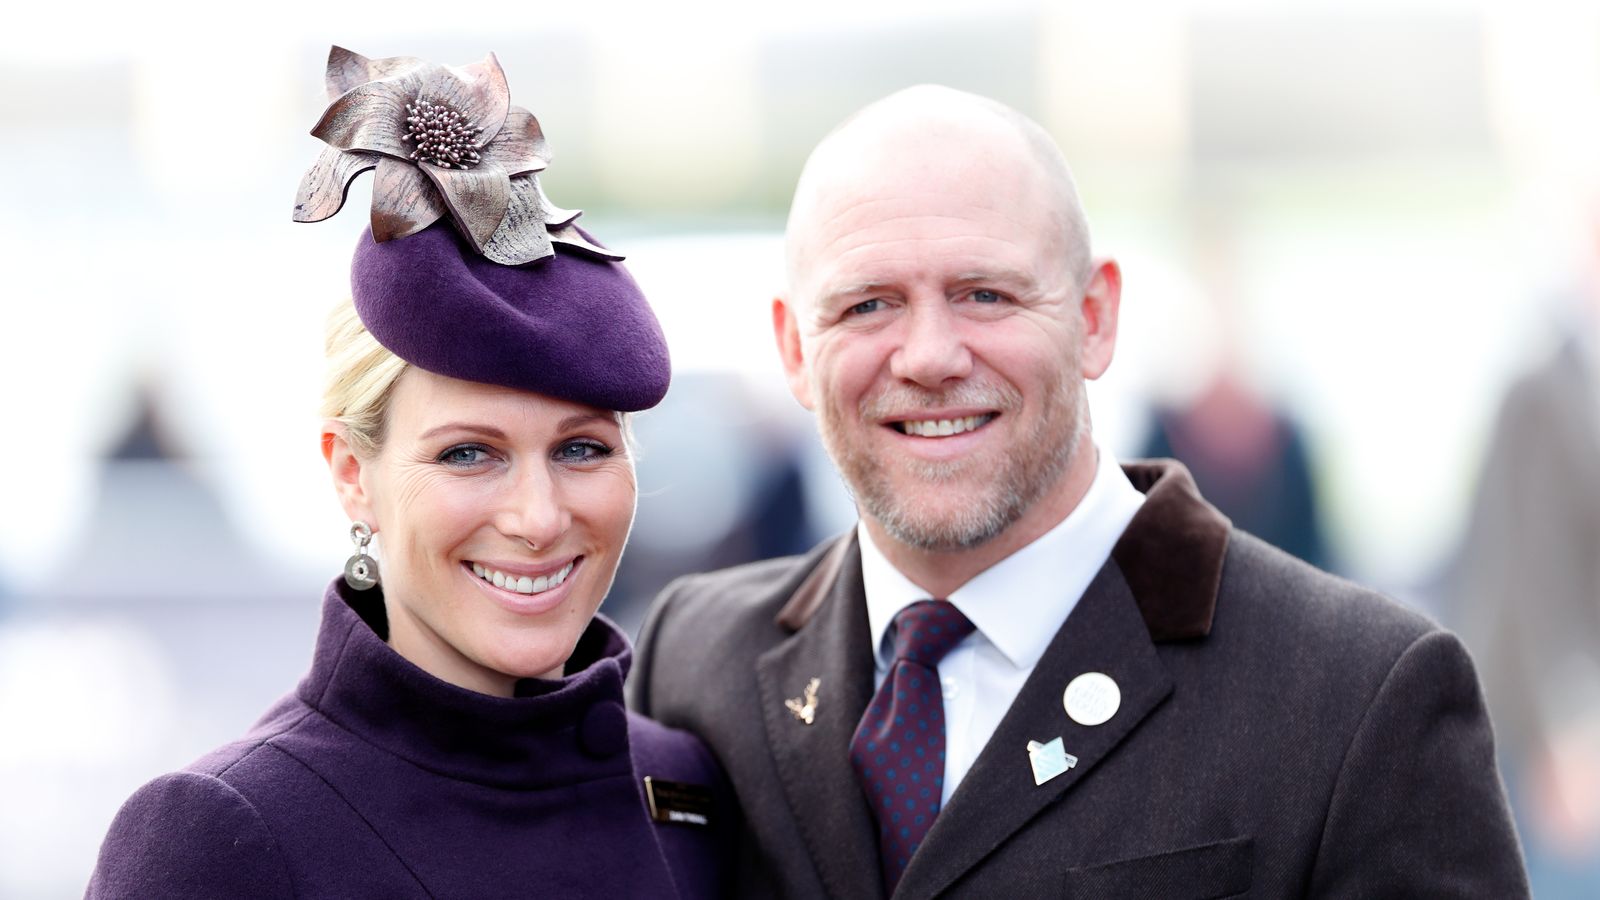 Mike Tindall reveals details of Zara Tindall's 'rapid' home birth on I'm A Celebrity